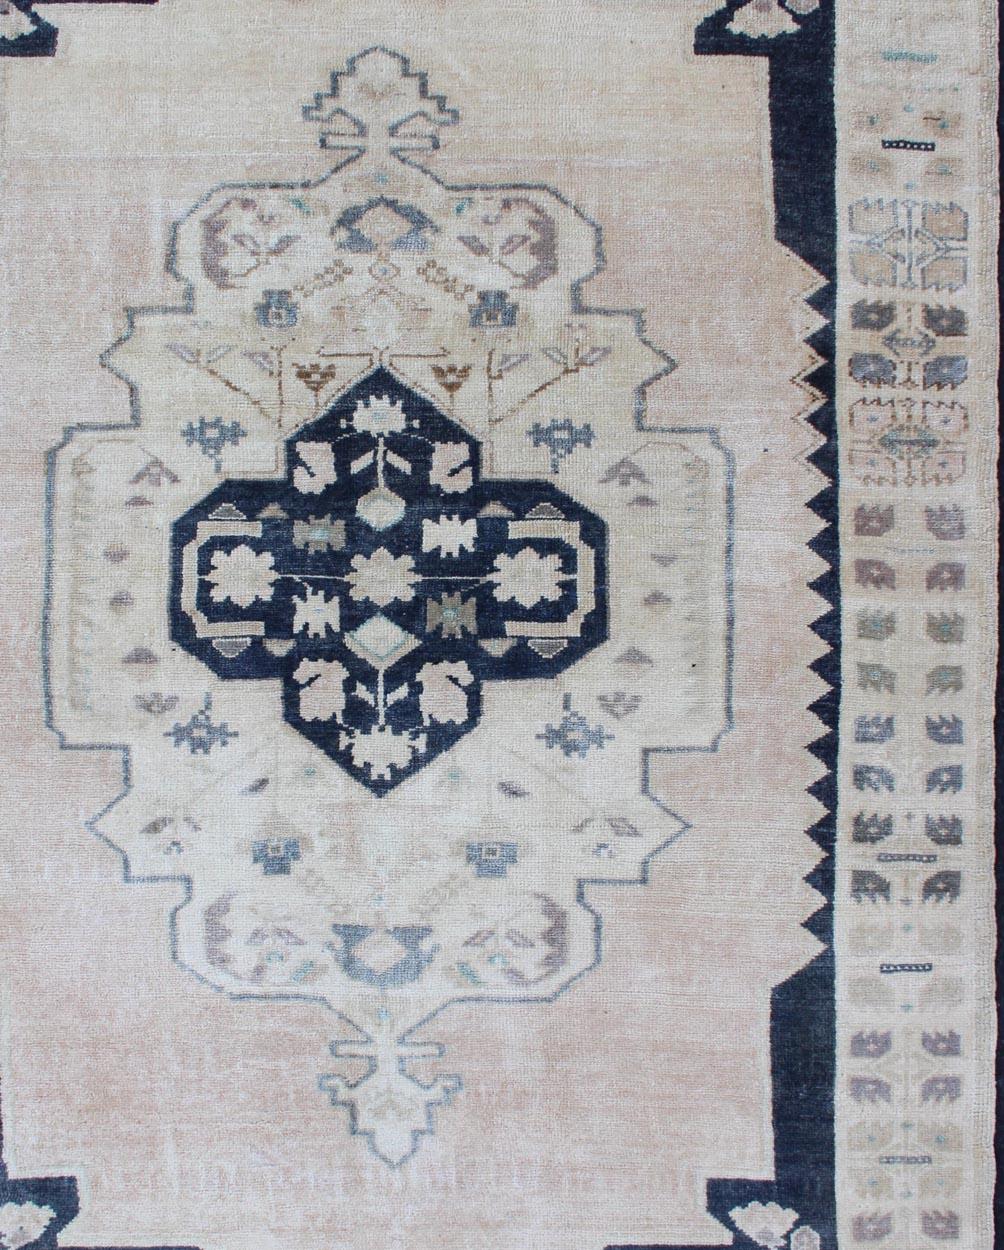 Faded vintage Turkish Oushak rug with central medallion in cream and blue, Keivan Woven Arts / rug EN-179354, country of origin / type: Turkey / Oushak, circa 1940

This sublime and enchanting vintage rug, a gorgeous Oushak rug made in Turkey